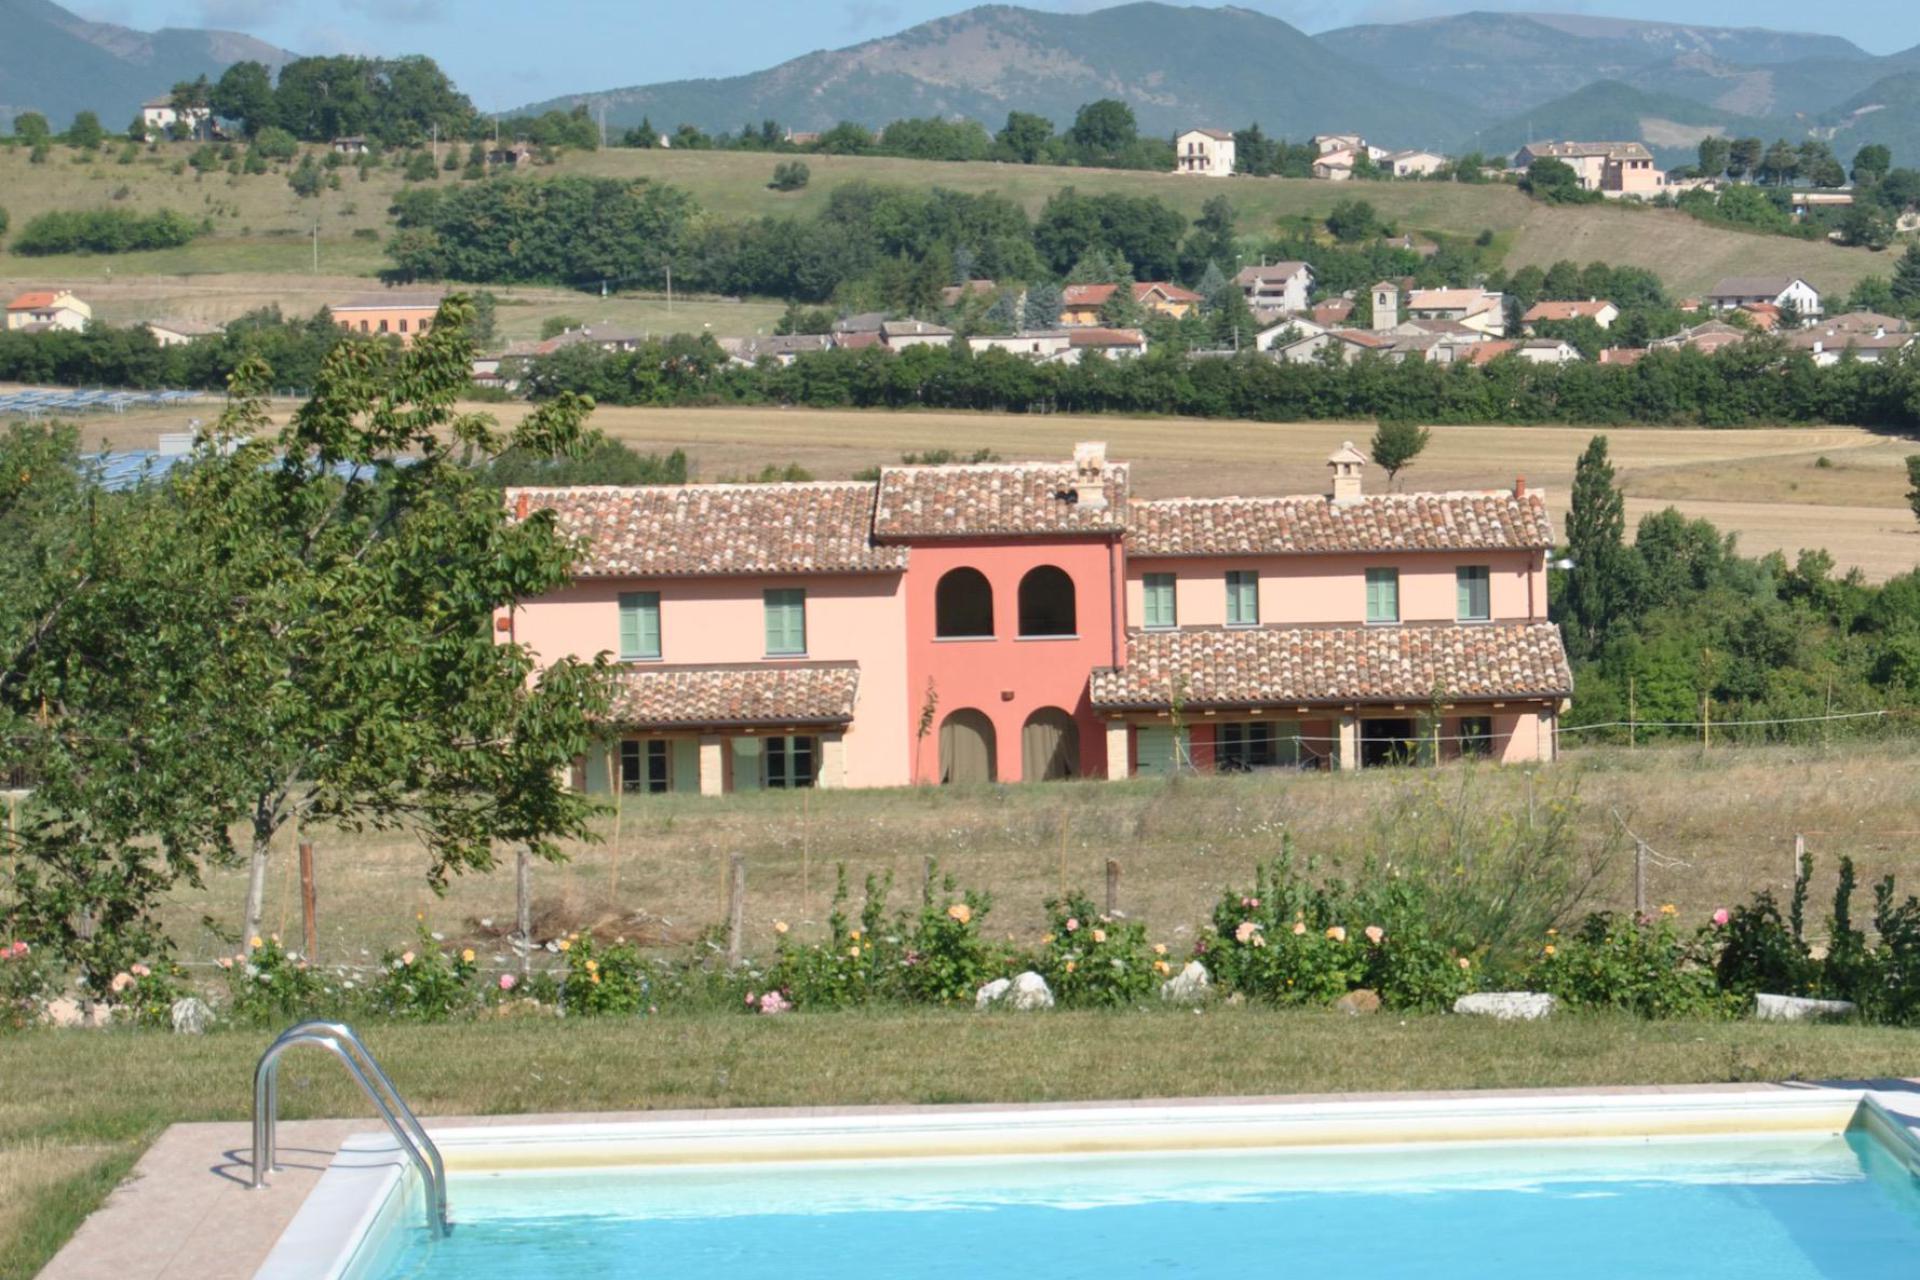 Agriturismo Marche, cozy atmosphere and kid friendly